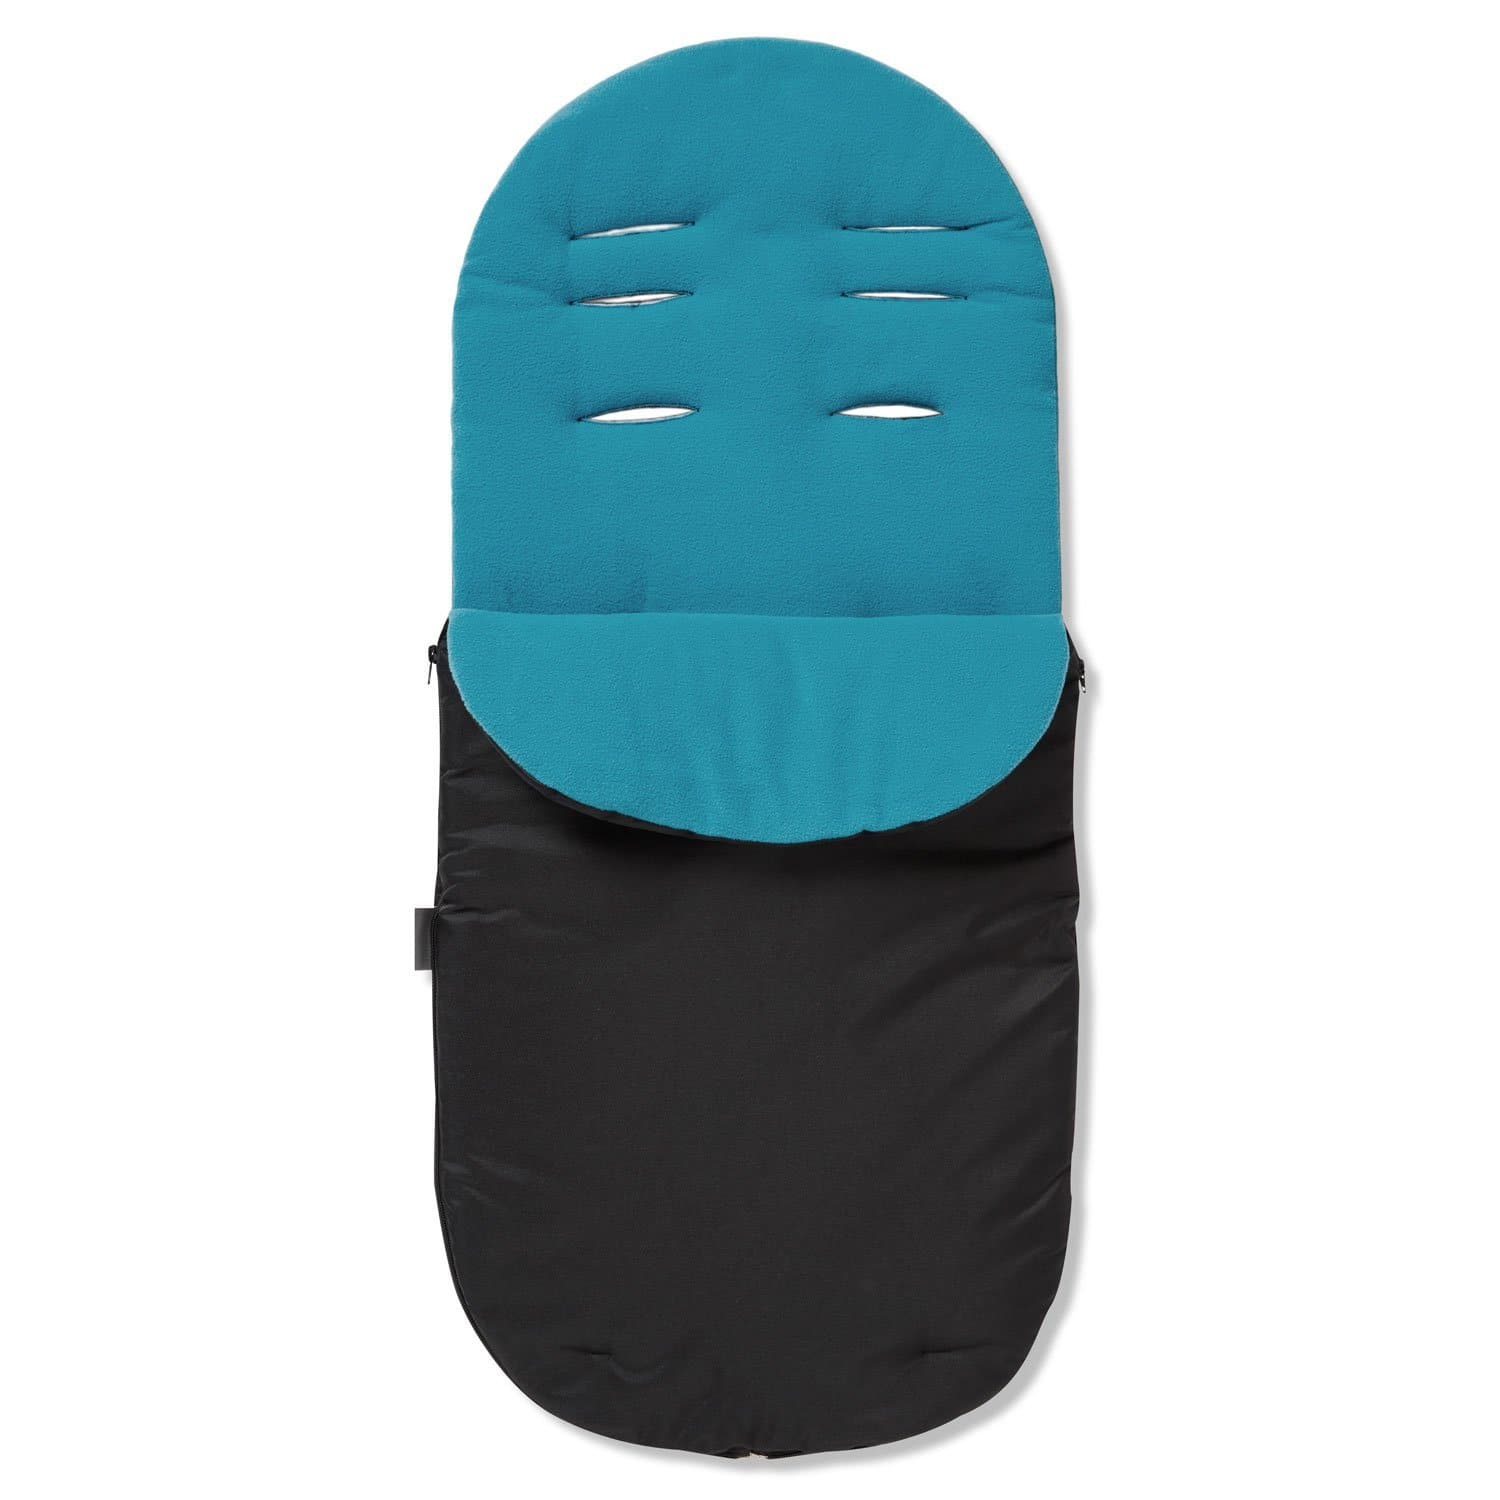 Footmuff / Cosy Toes Compatible with Maxi Cosi - Turquoise / Fits All Models | For Your Little One